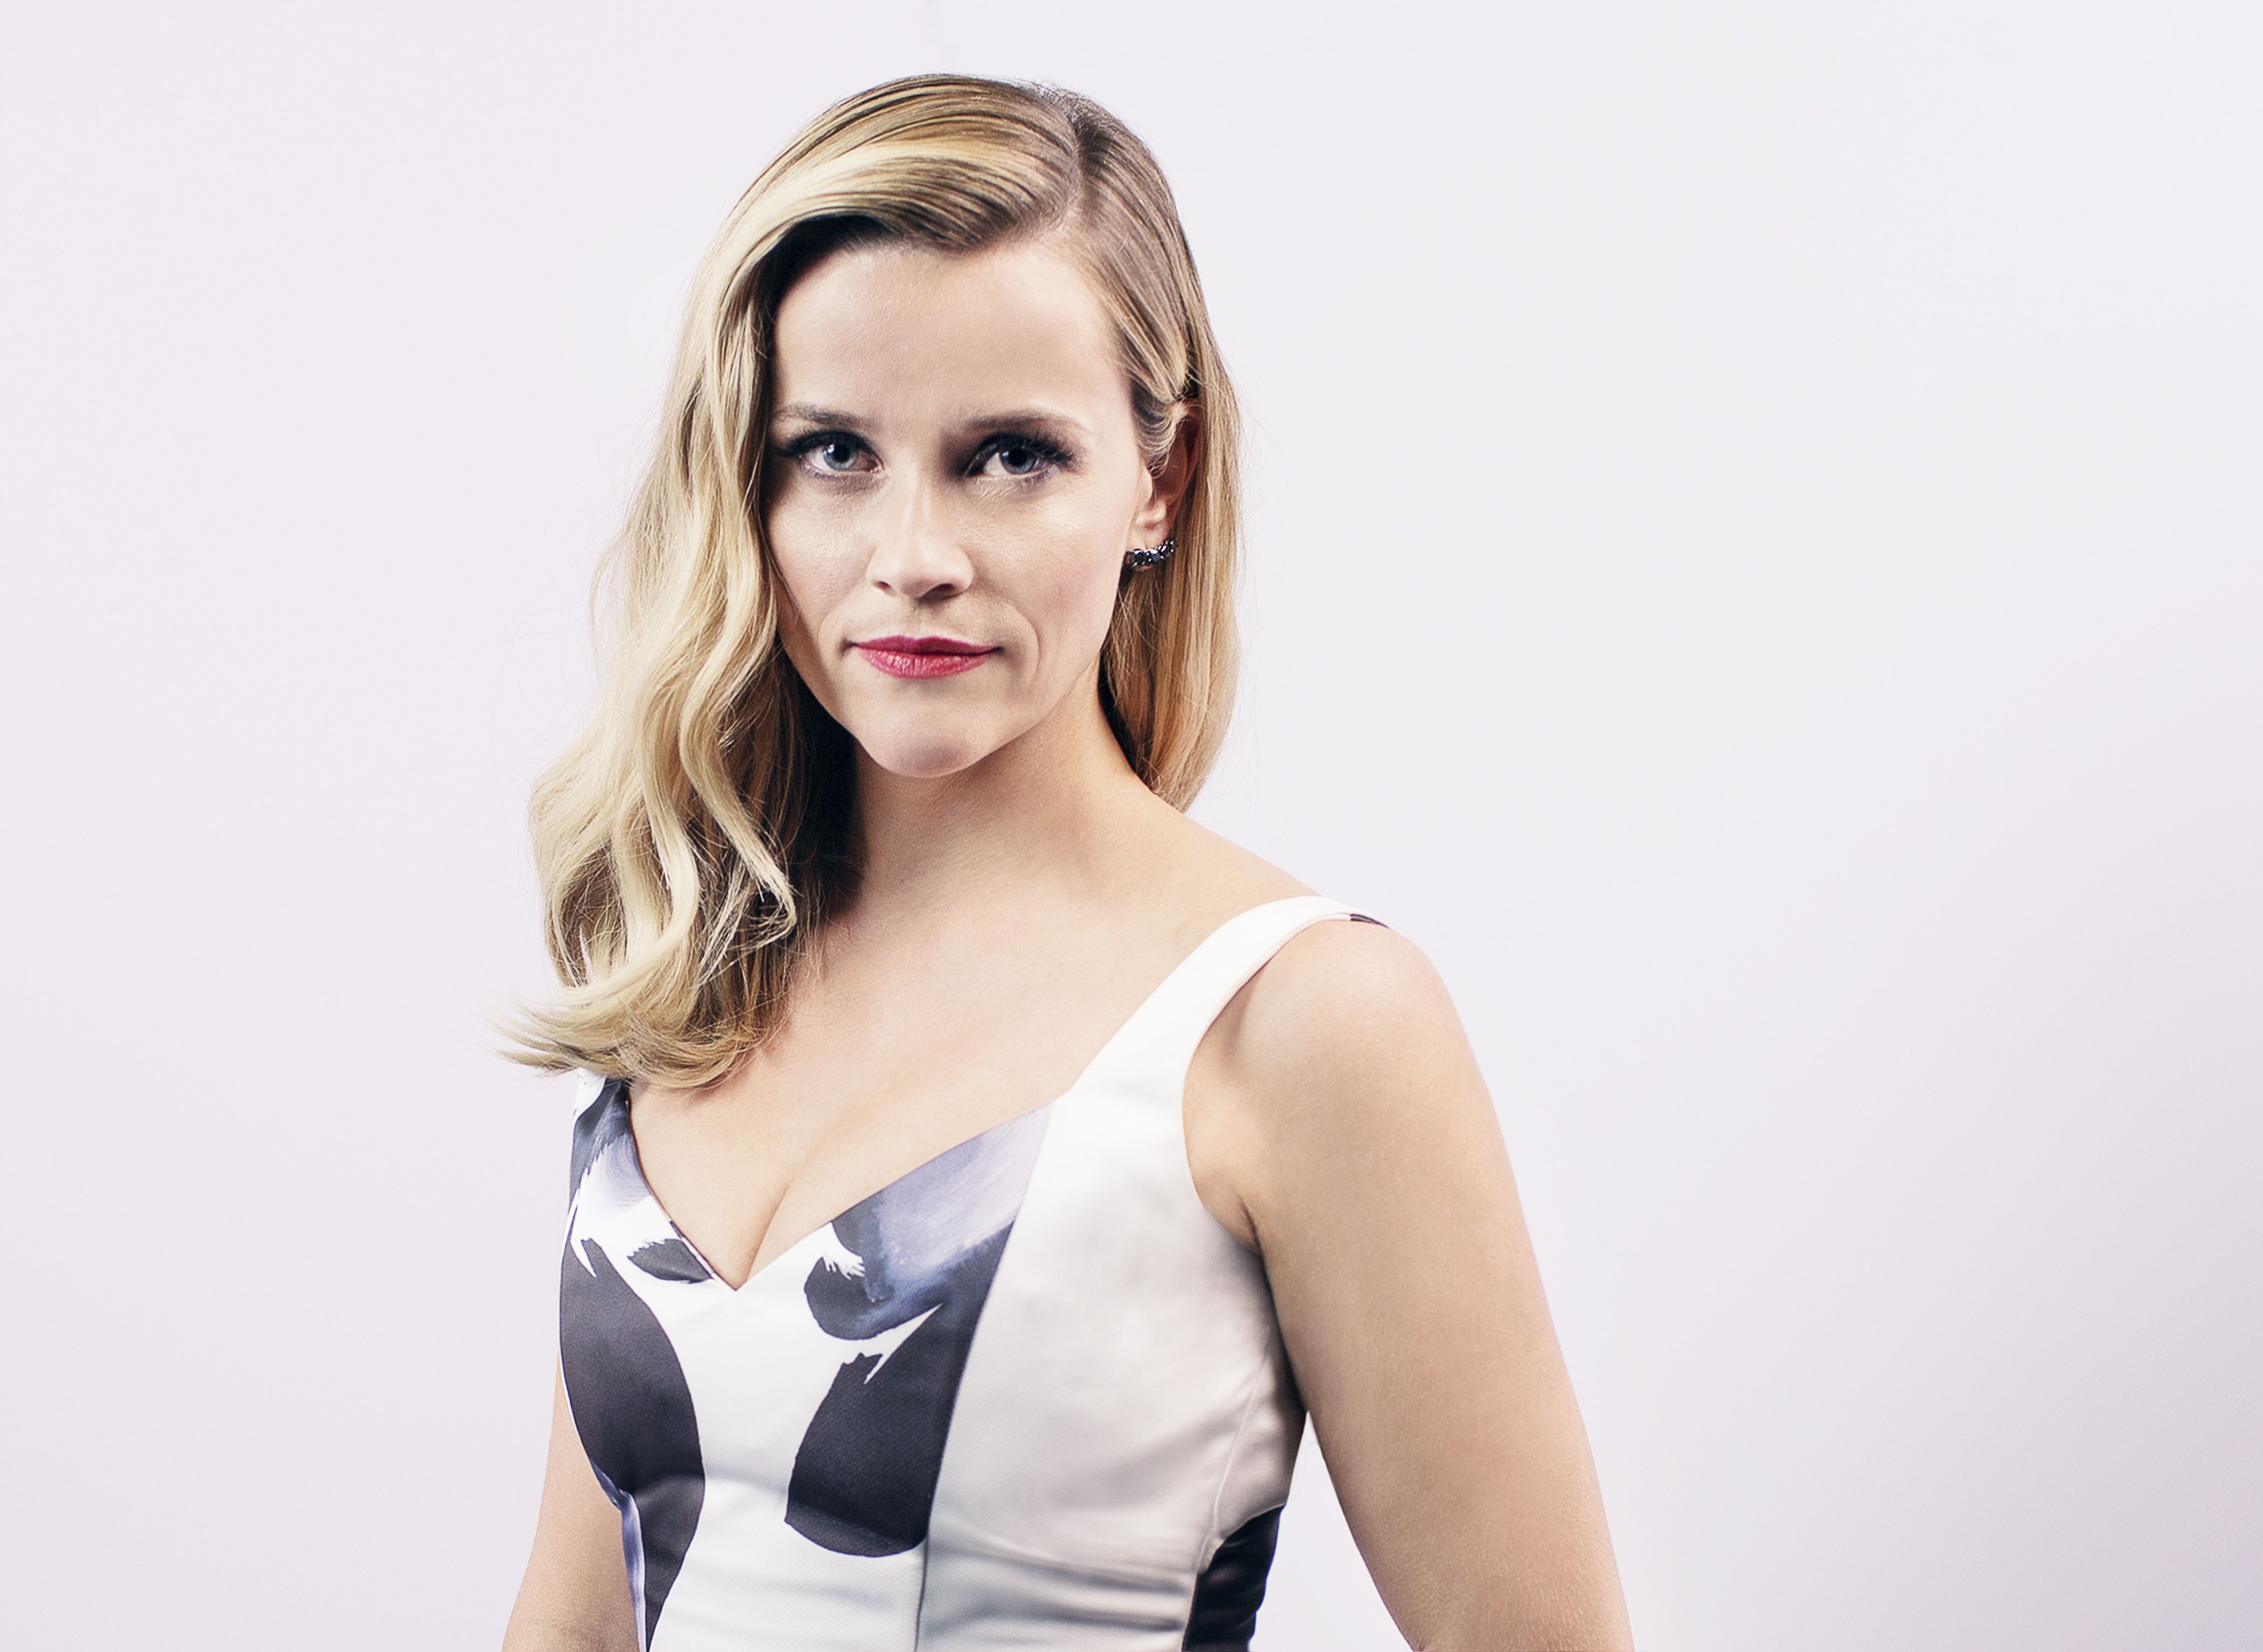 Reese Witherspoon`s picture on a white background